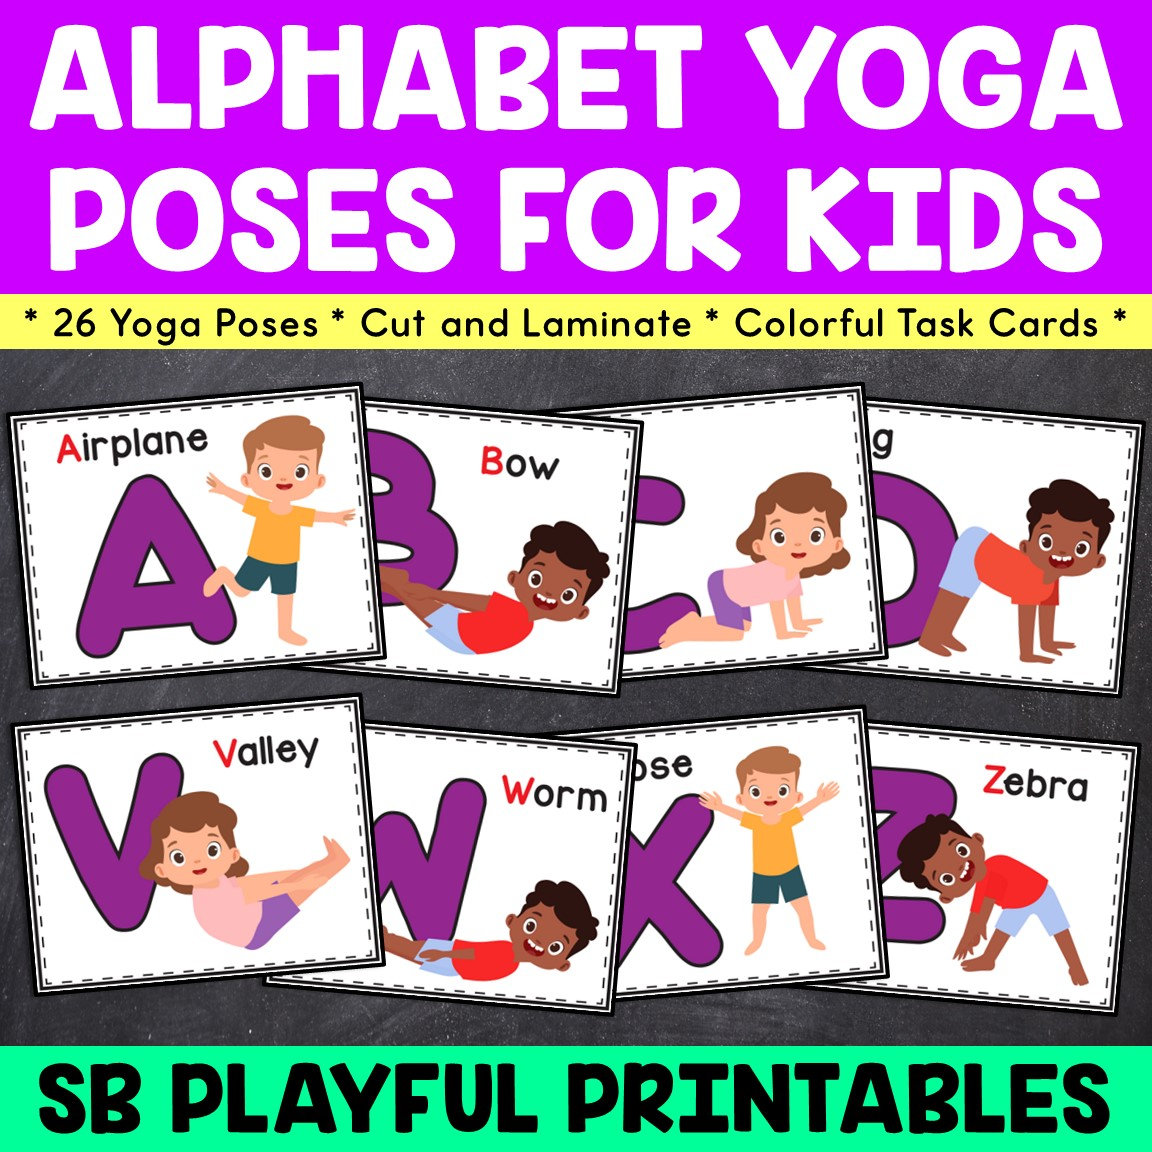 Free printable yoga poses in French & English with 39 Yoga Poses